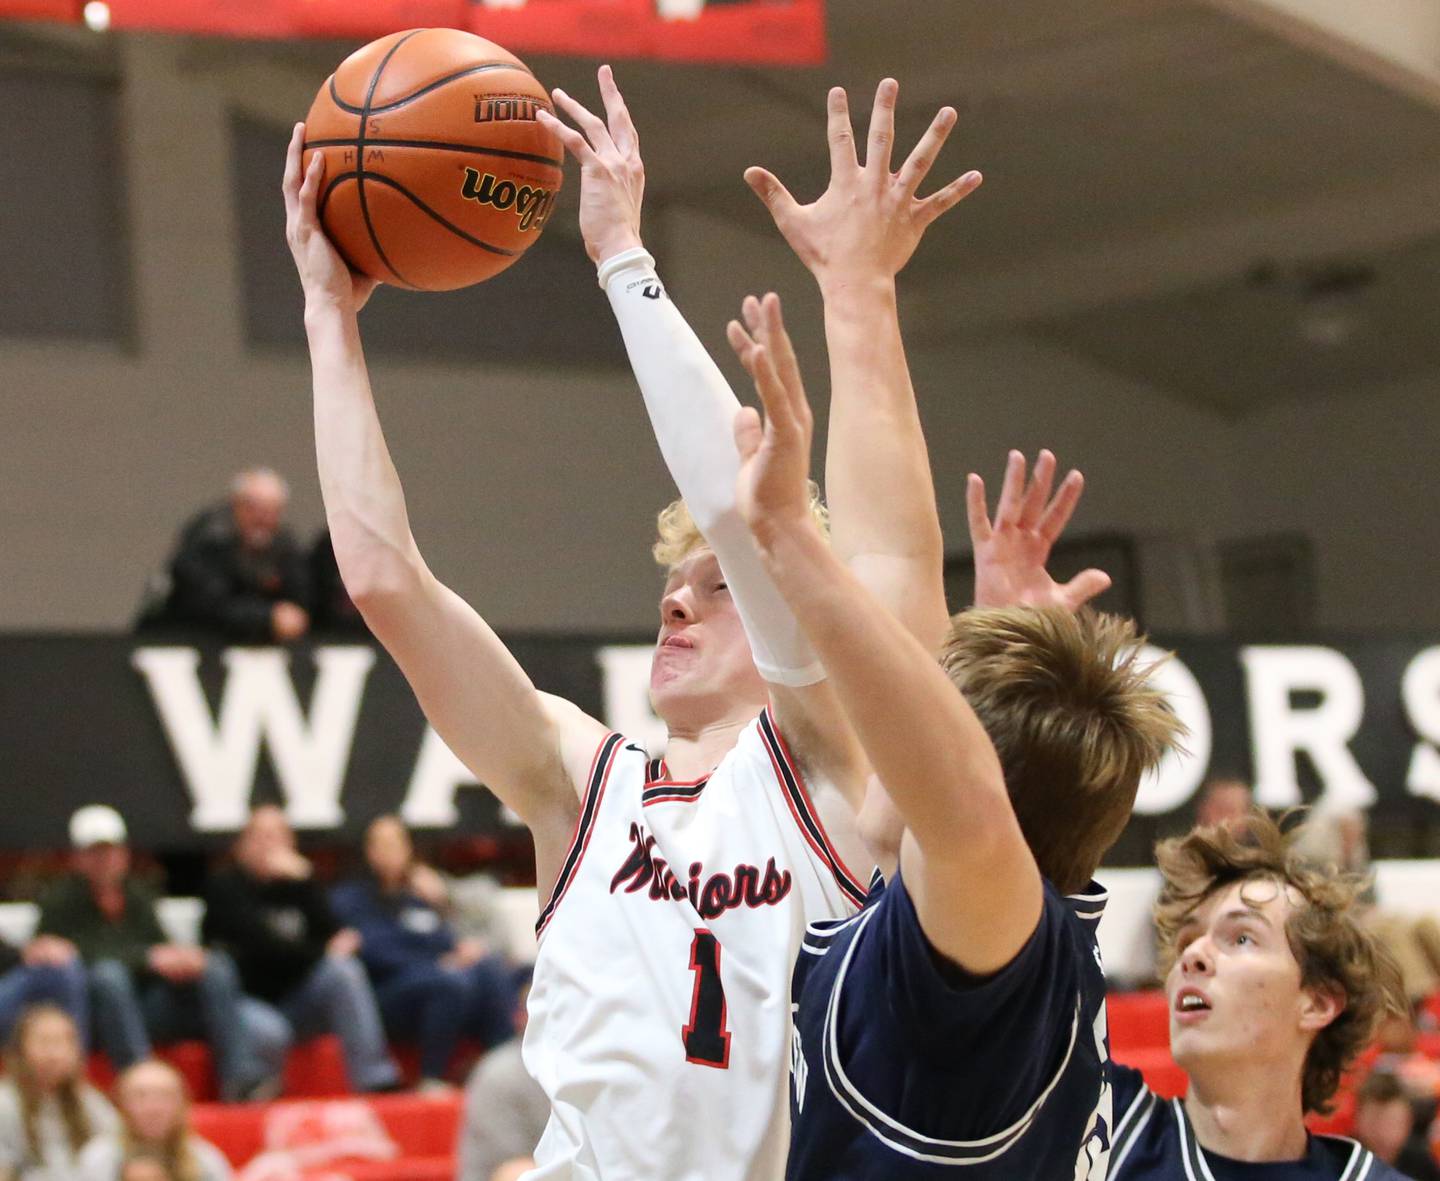 Woodland's Connor Dodge (1) cuts in for a shot against Ridgeview during the Route 17 Thanksgiving Classic on Tuesday, Nov. 22, 2022, in rural Streator.